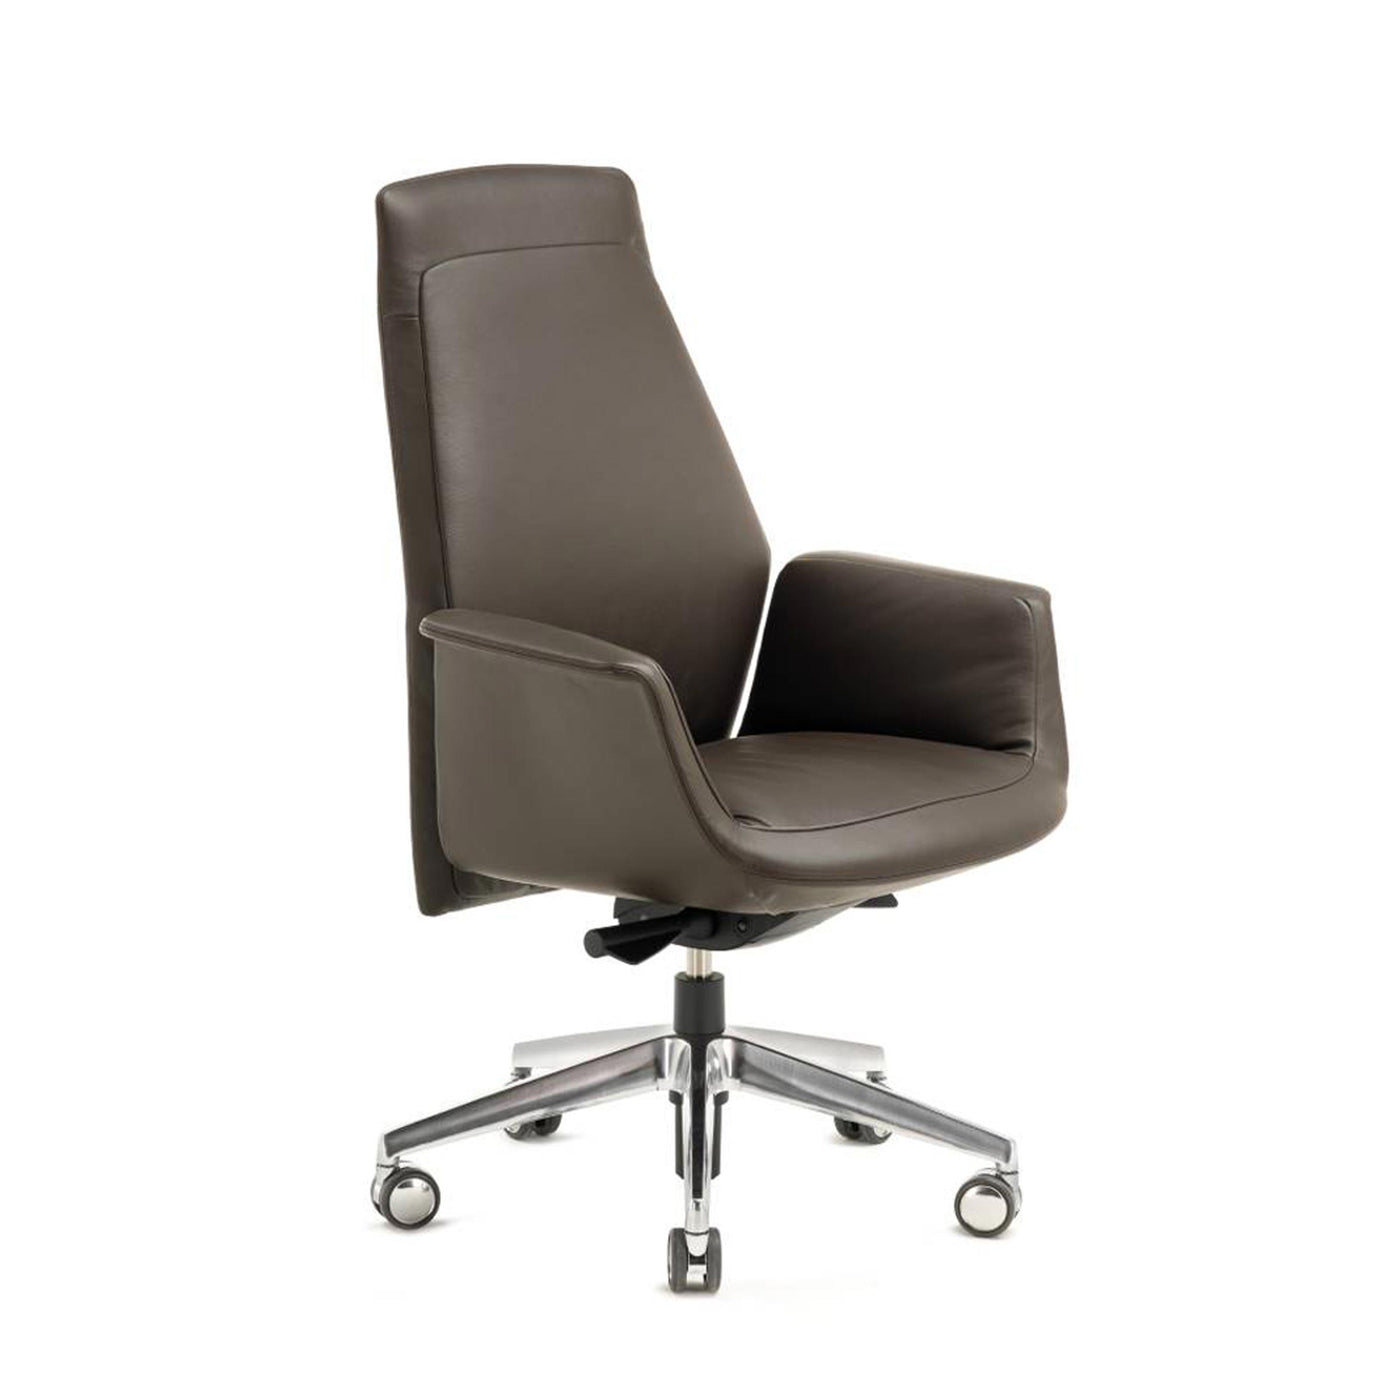 Office Swivel Chair with Wheels DOWNTOWN EXECUTIVE by Jean-Marie Massaud for Poltrona Frau 03